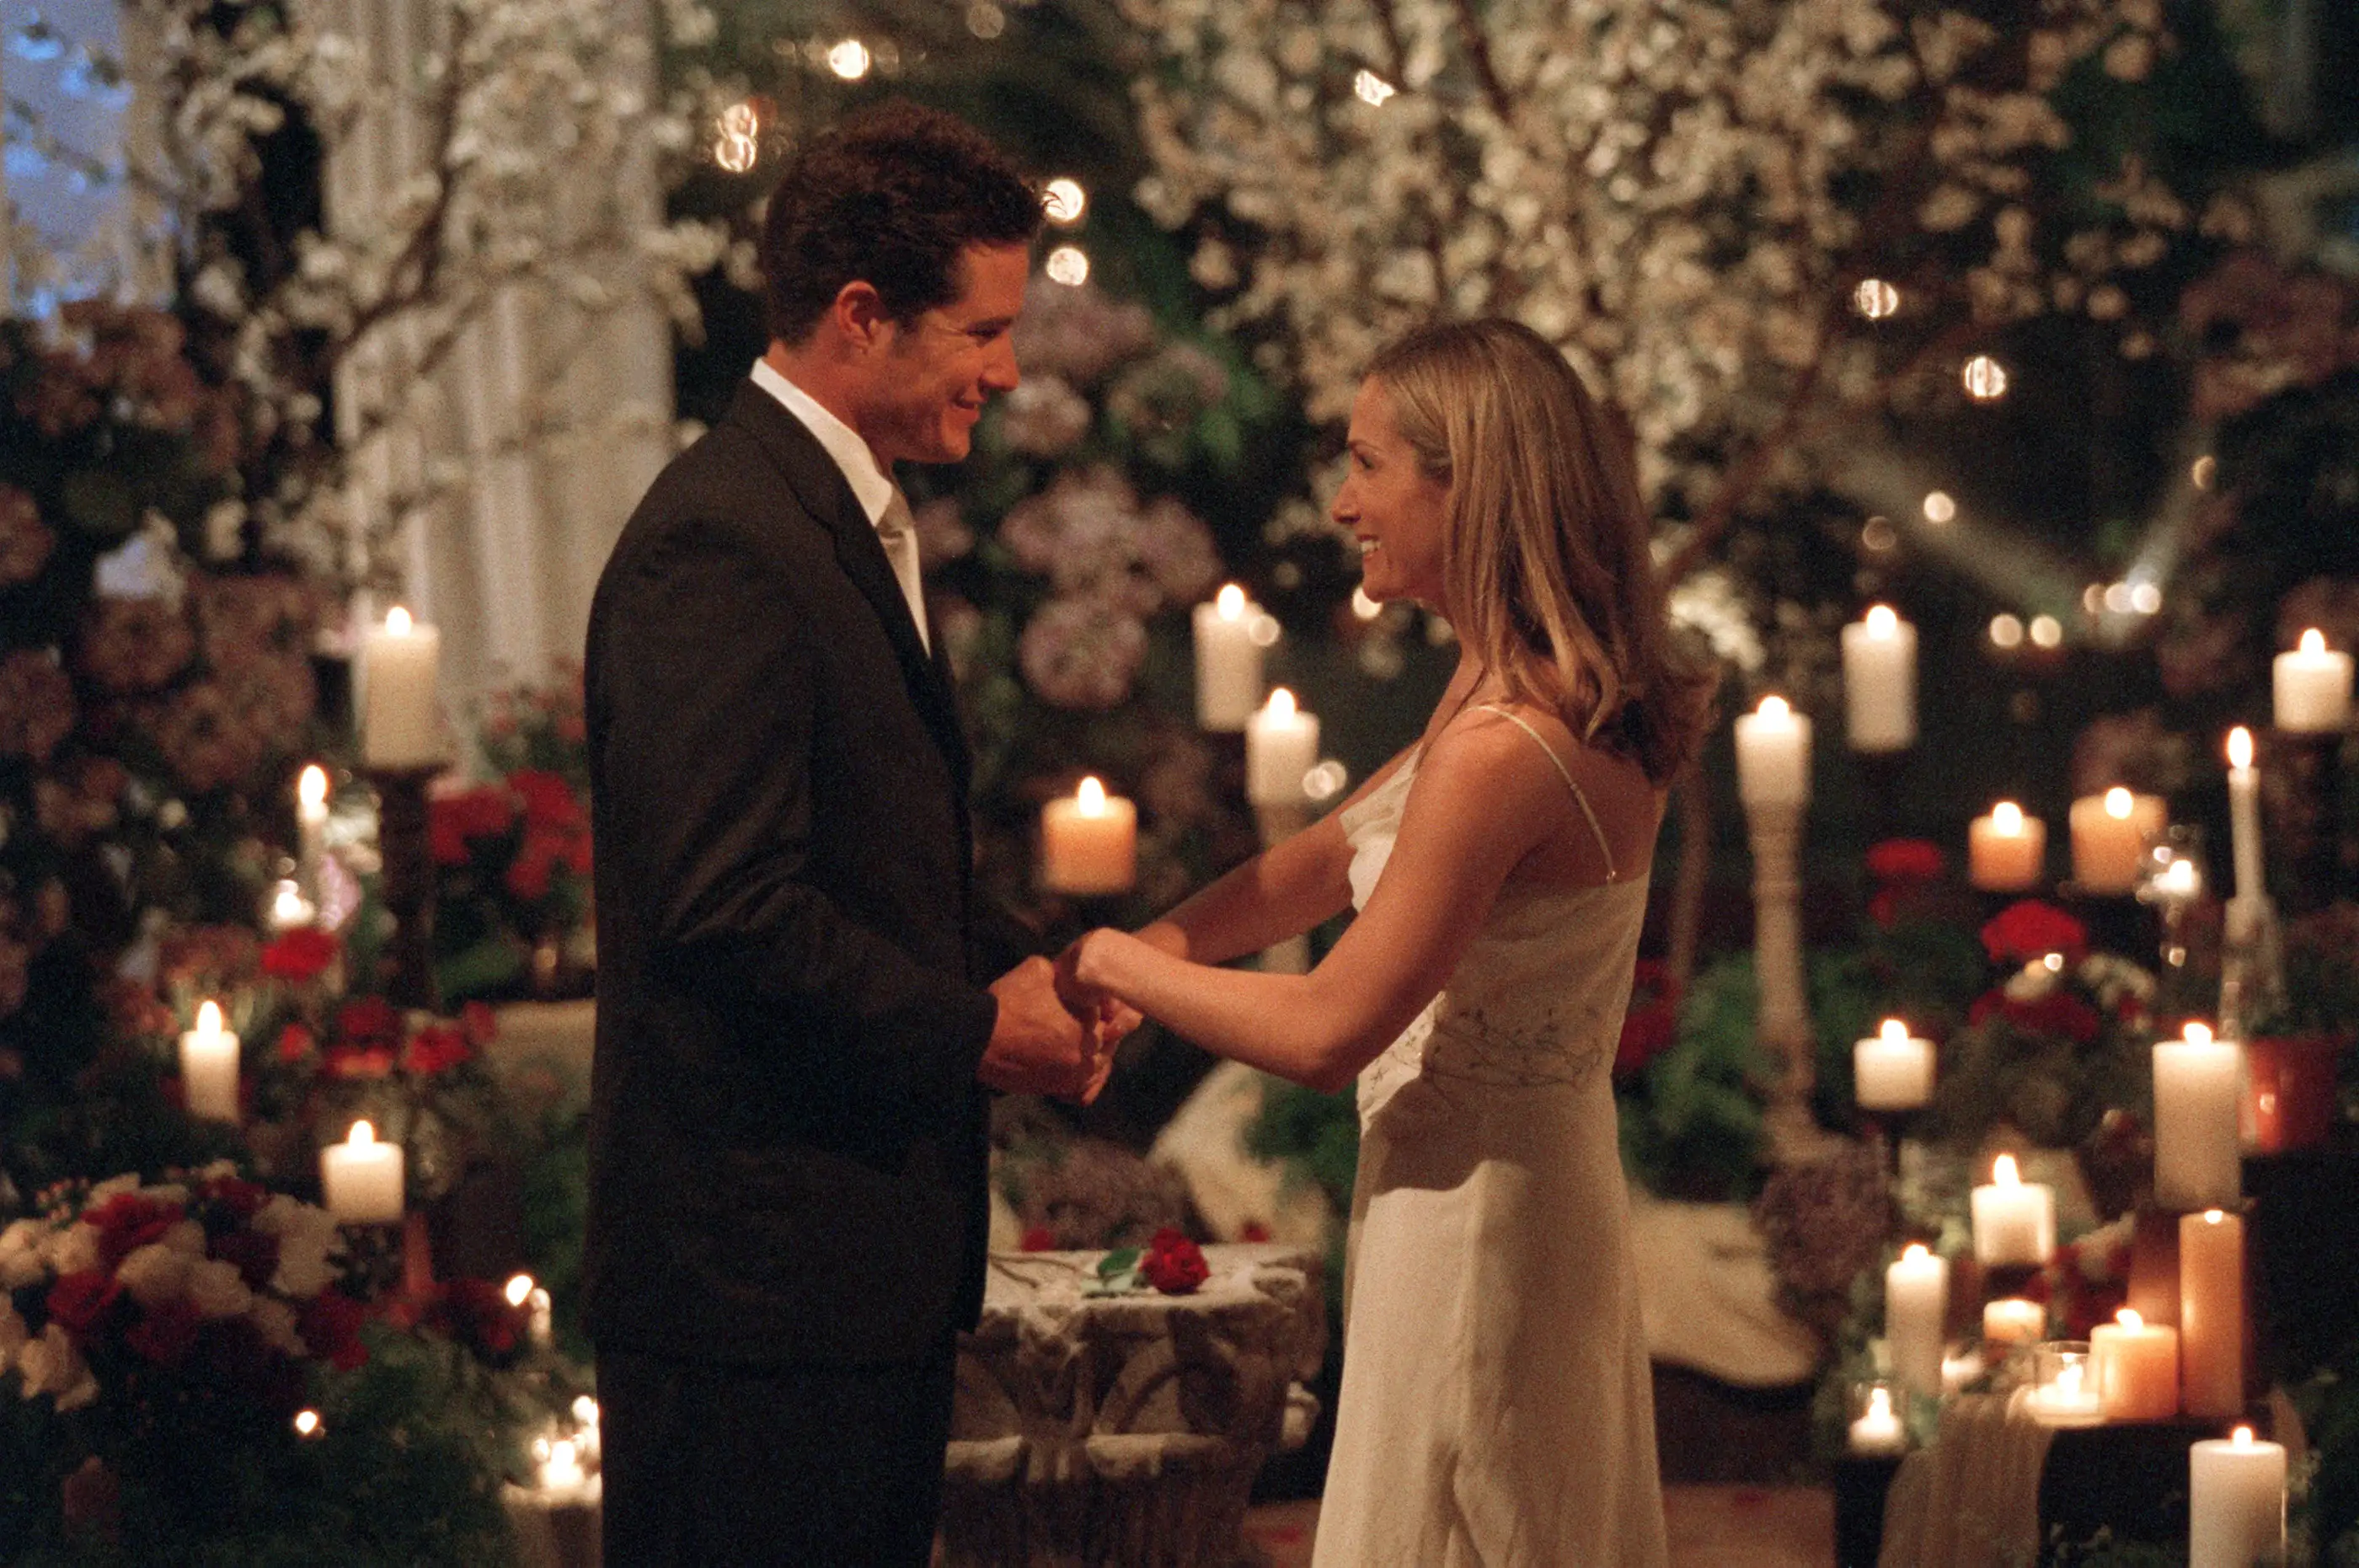 THE BACHELOR - &quot;Episode 308&quot; - After the two final ladies, Jen and Kirsten, have the chance to meet Andrew's family, and he goes shopping for an expensive piece of jewelry, the time comes for Andrew to make the final difficult decision. Which woman has captured his heart? Will he propose? Will she accept? How will he break the news to the woman he has not chosen? Will she be heartbroken? All will be revealed during the gripping two-hour conclusion of &quot;The Bachelor,&quot; SUNDAY, MAY 18 (9:00-11:00 p.m., ET), on the ABC Television Network.